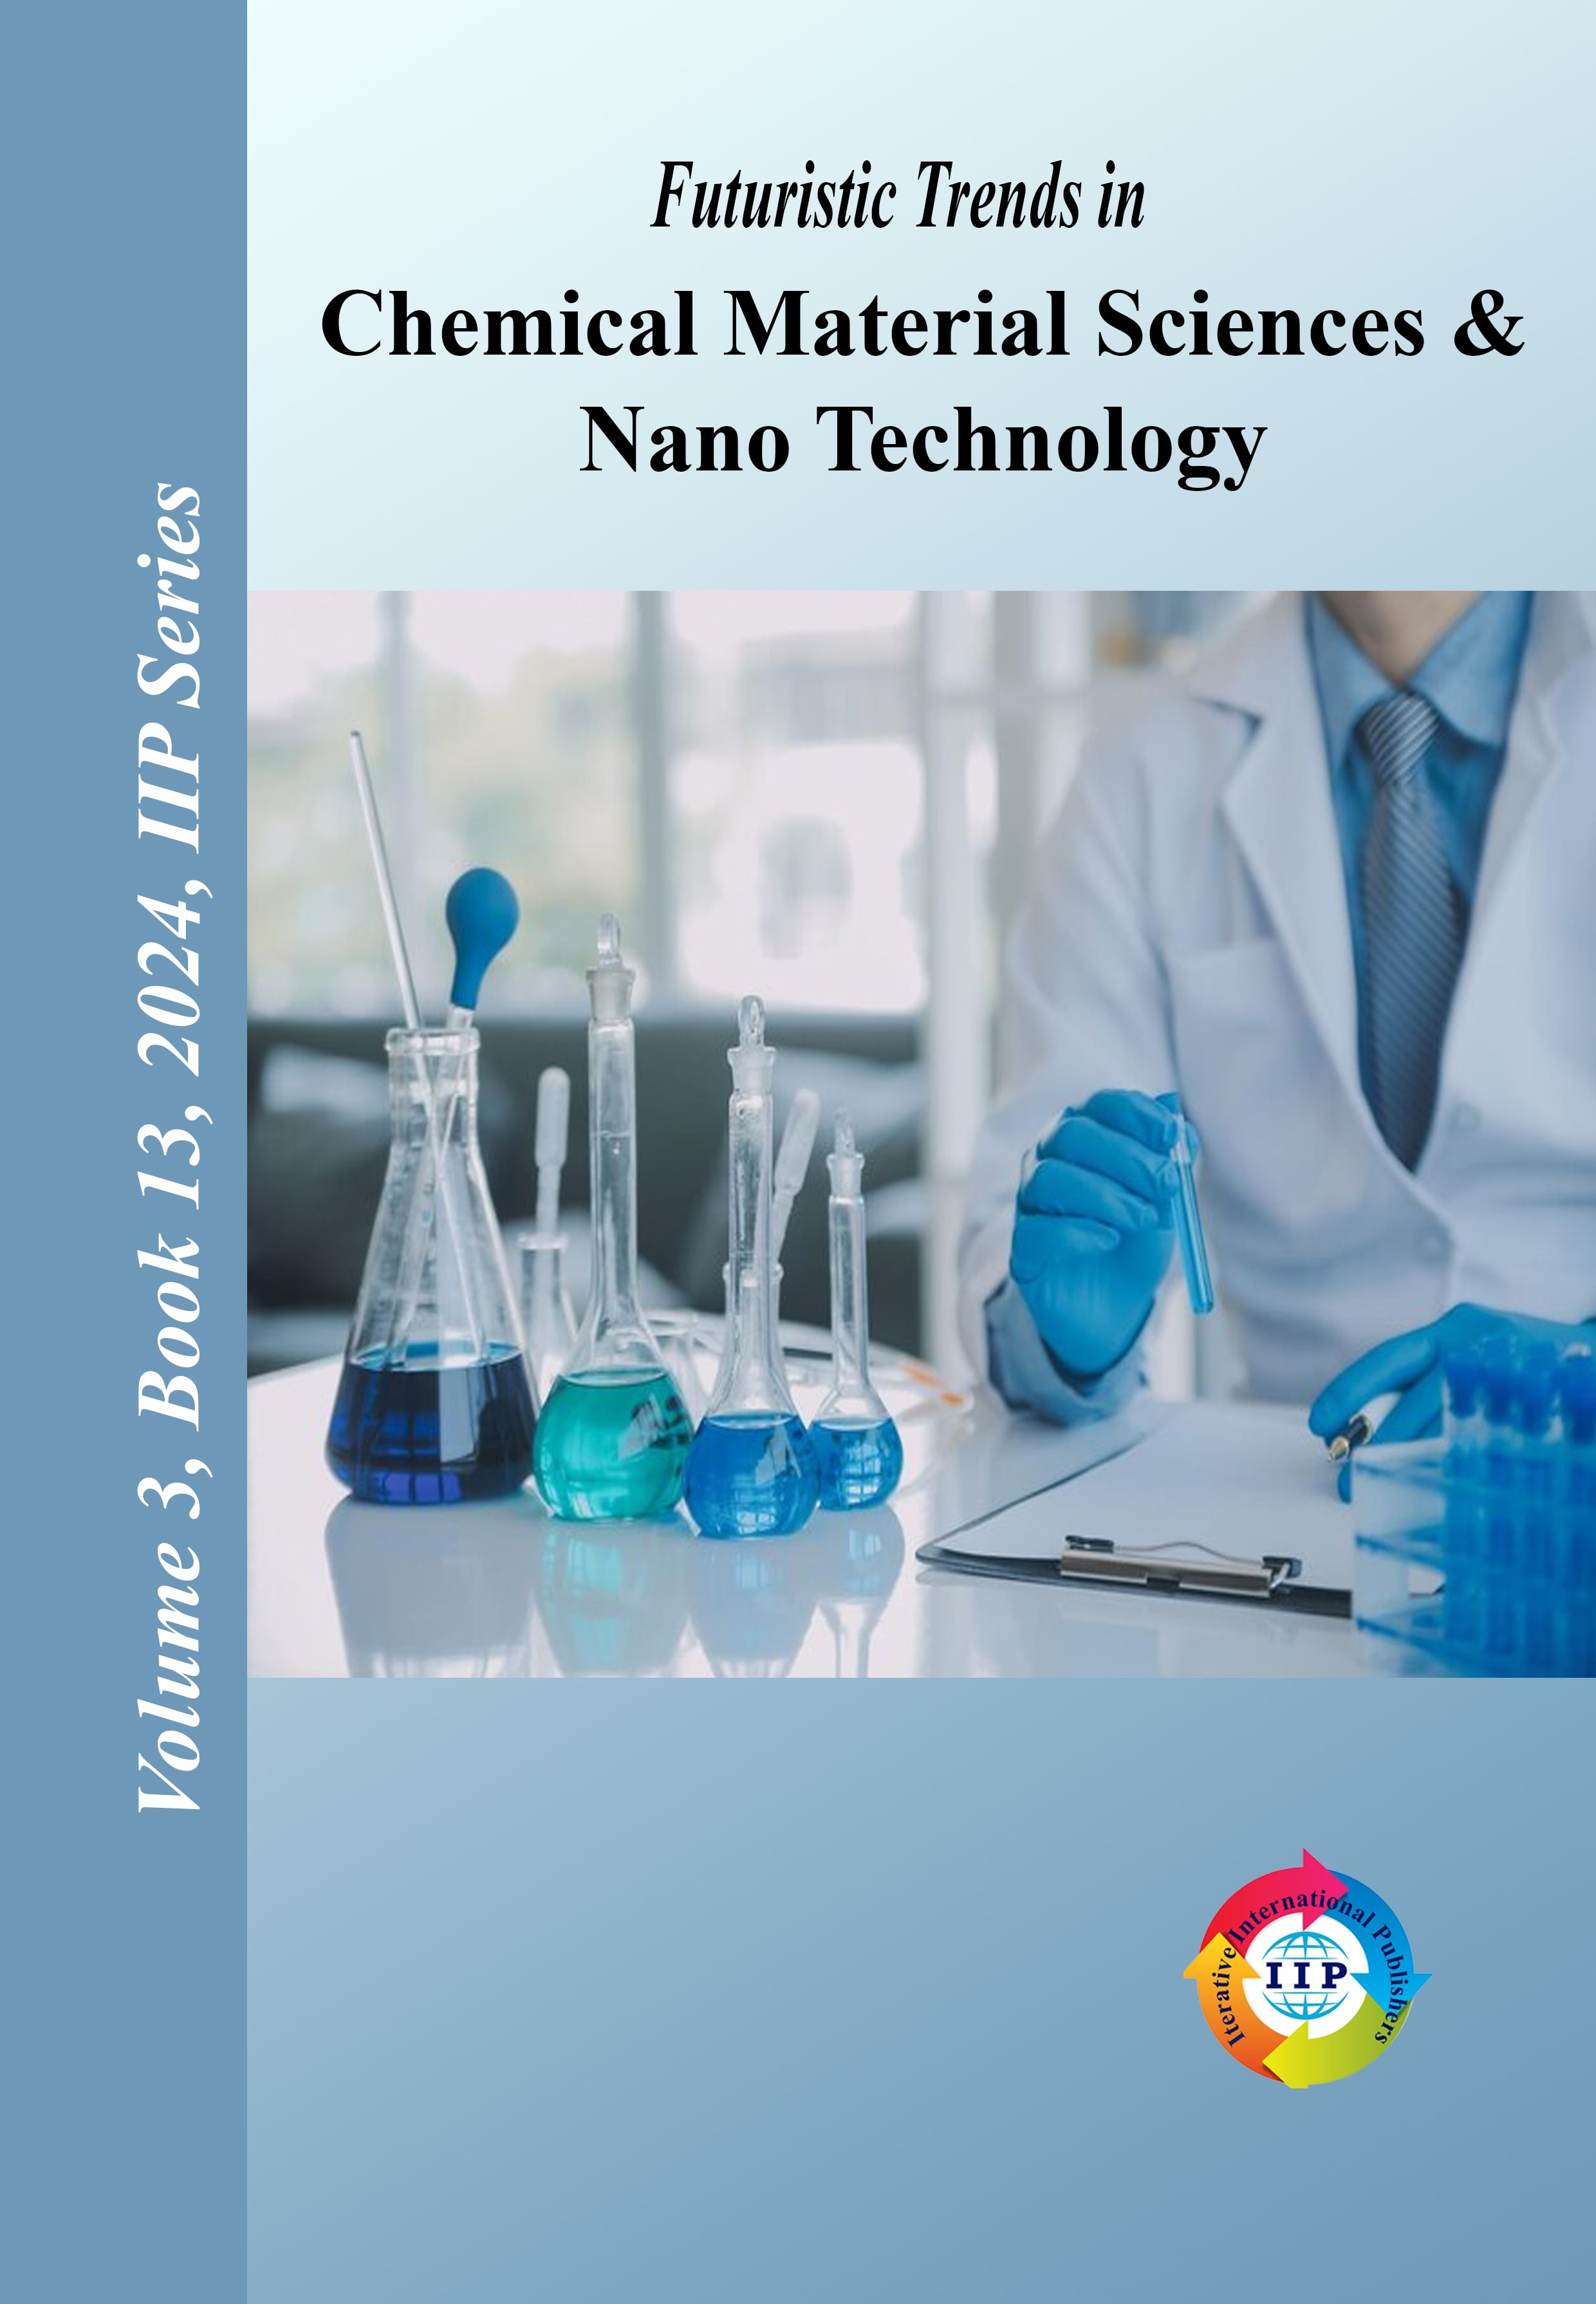 Futuristic Trends in Chemical Material Sciences & Nano Technology  Volume 3 Book 13